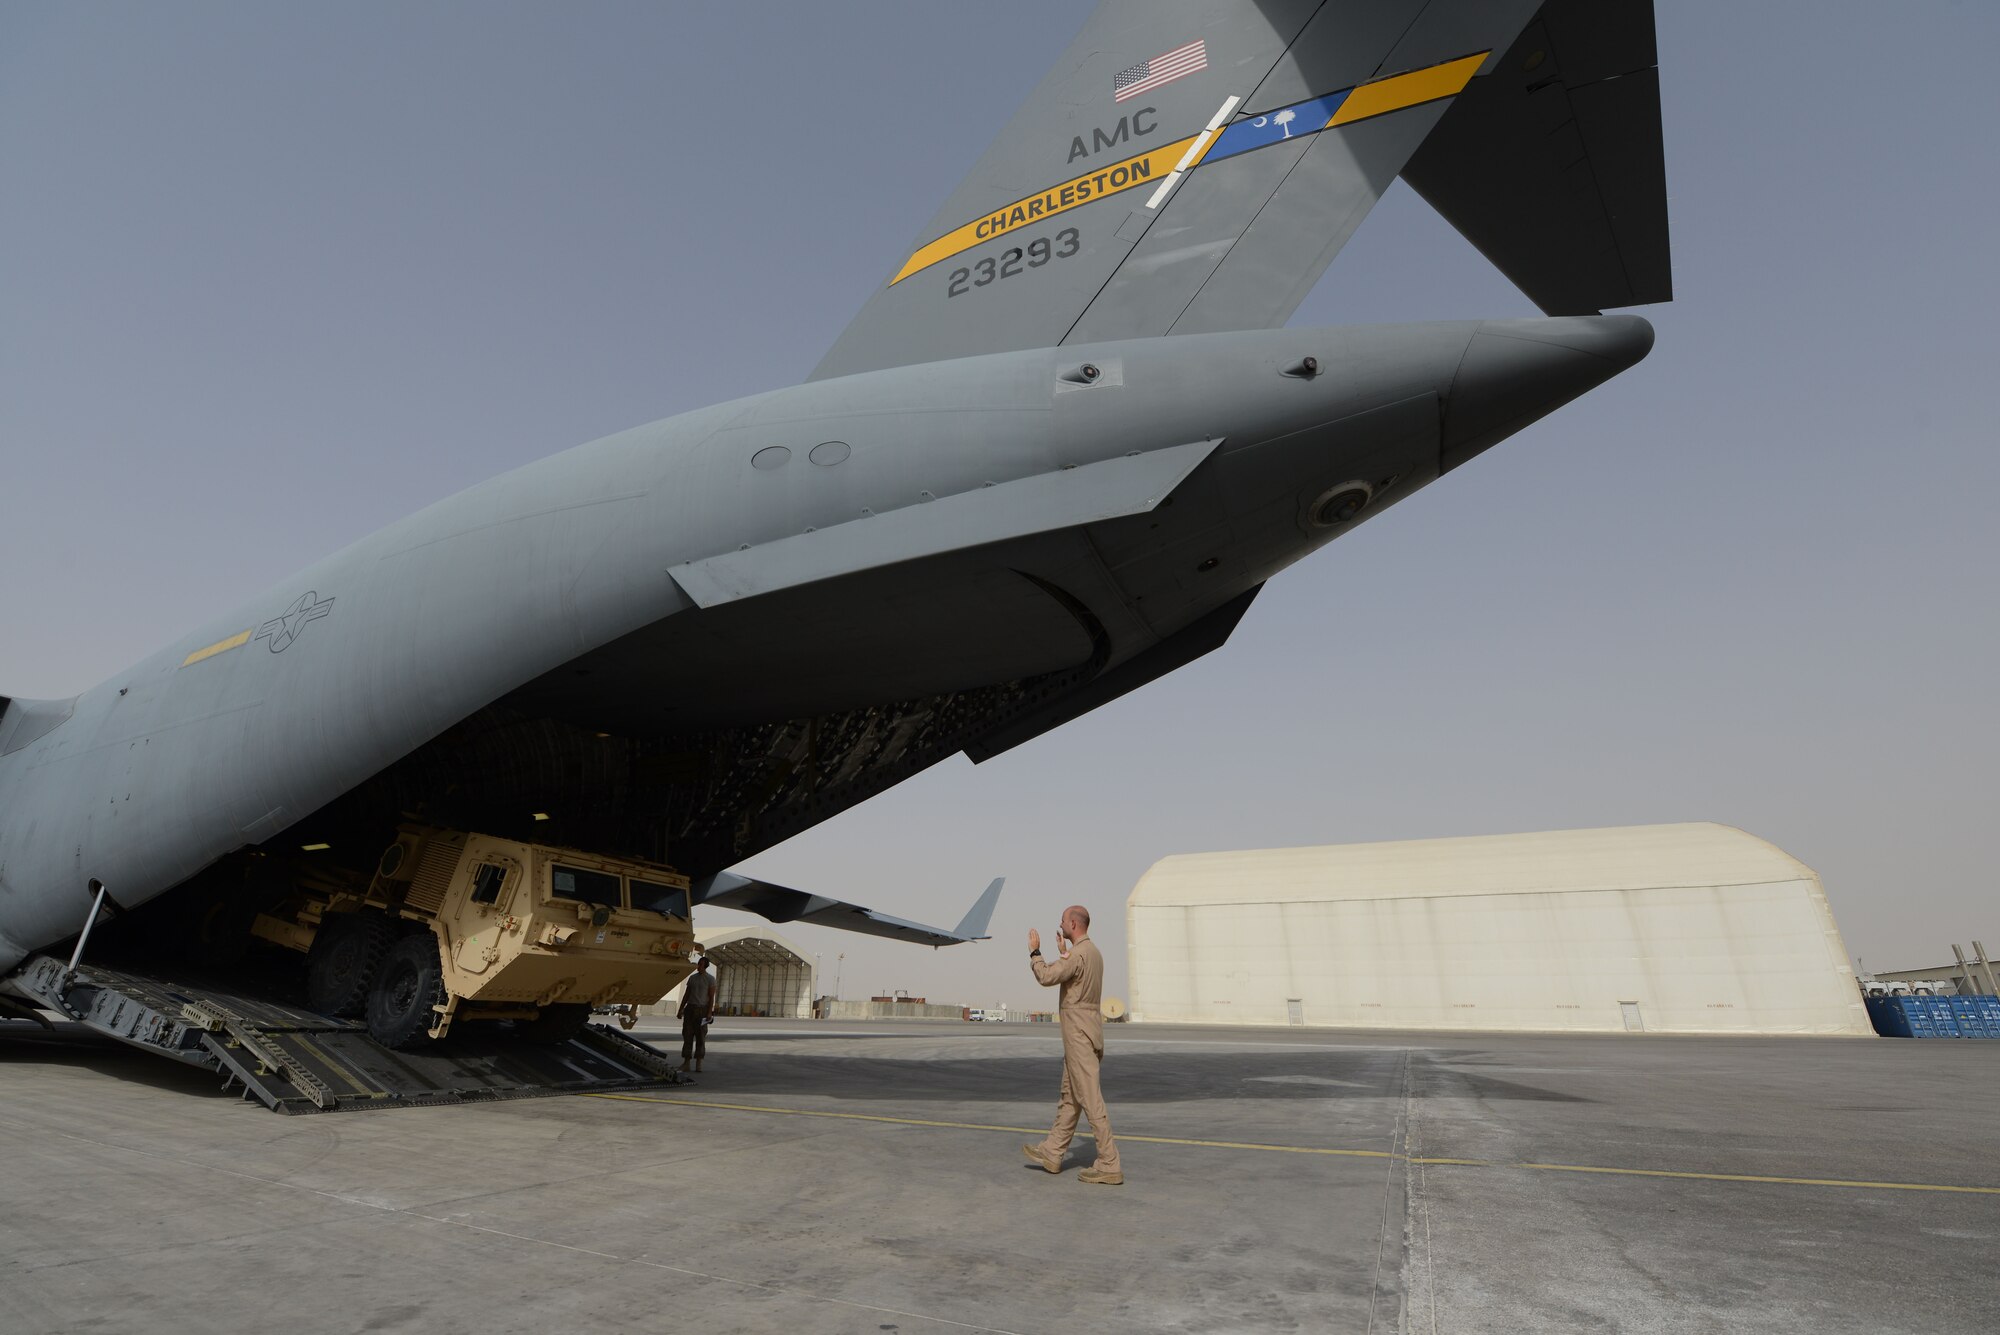 U.S. Air Force Staff Sgt. Doug Wattier, a loadmaster assigned to 816th Expeditionary Airlift Squadron, Detachment 2, directs the driver of a Heavy Expanded Mobility Tactical Truck as he backs onto a C-17 Globemaster III while at Mazar-e Sharif, Afghanistan June 24, 2014. Loadmasters are responsible for ensuring the proper loading of vehicles, pallets and equipment on aircraft. Wattier, a native of Jacksonville, N.C. is deployed from the 317th Airlift Squadron at Joint Base Charleston, S.C. (U.S. Air Force photo by Master Sgt. Cohen A. Young/Released)  